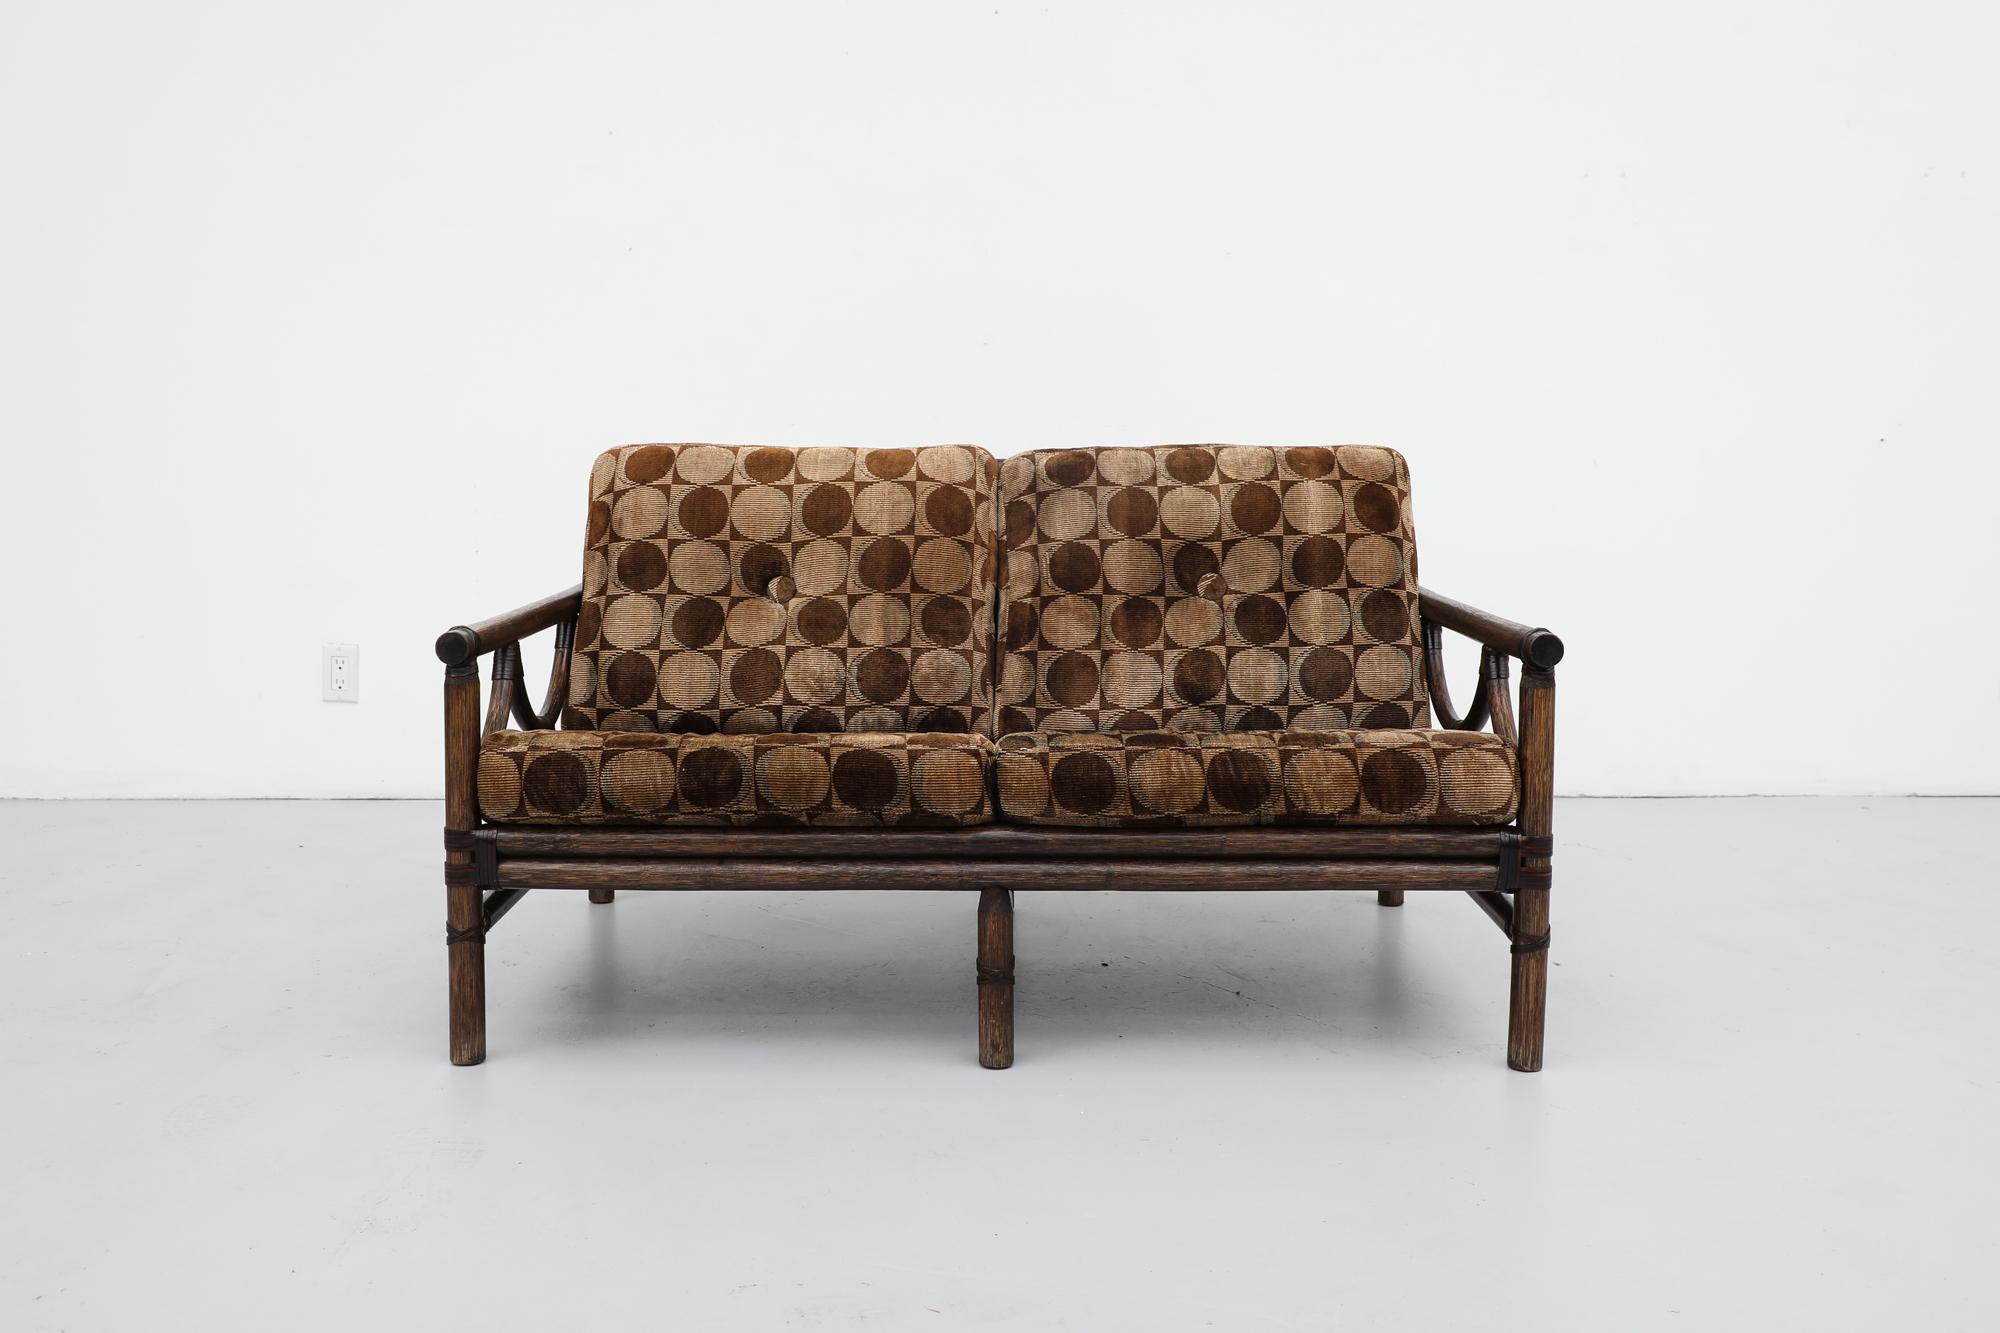 1970s thick bamboo framed loveseat with original Verner Panton cushions. The cushions are visibly aged and worn, yet still intact. The frame is in good original condition with signs of wear consistent with its age and use.